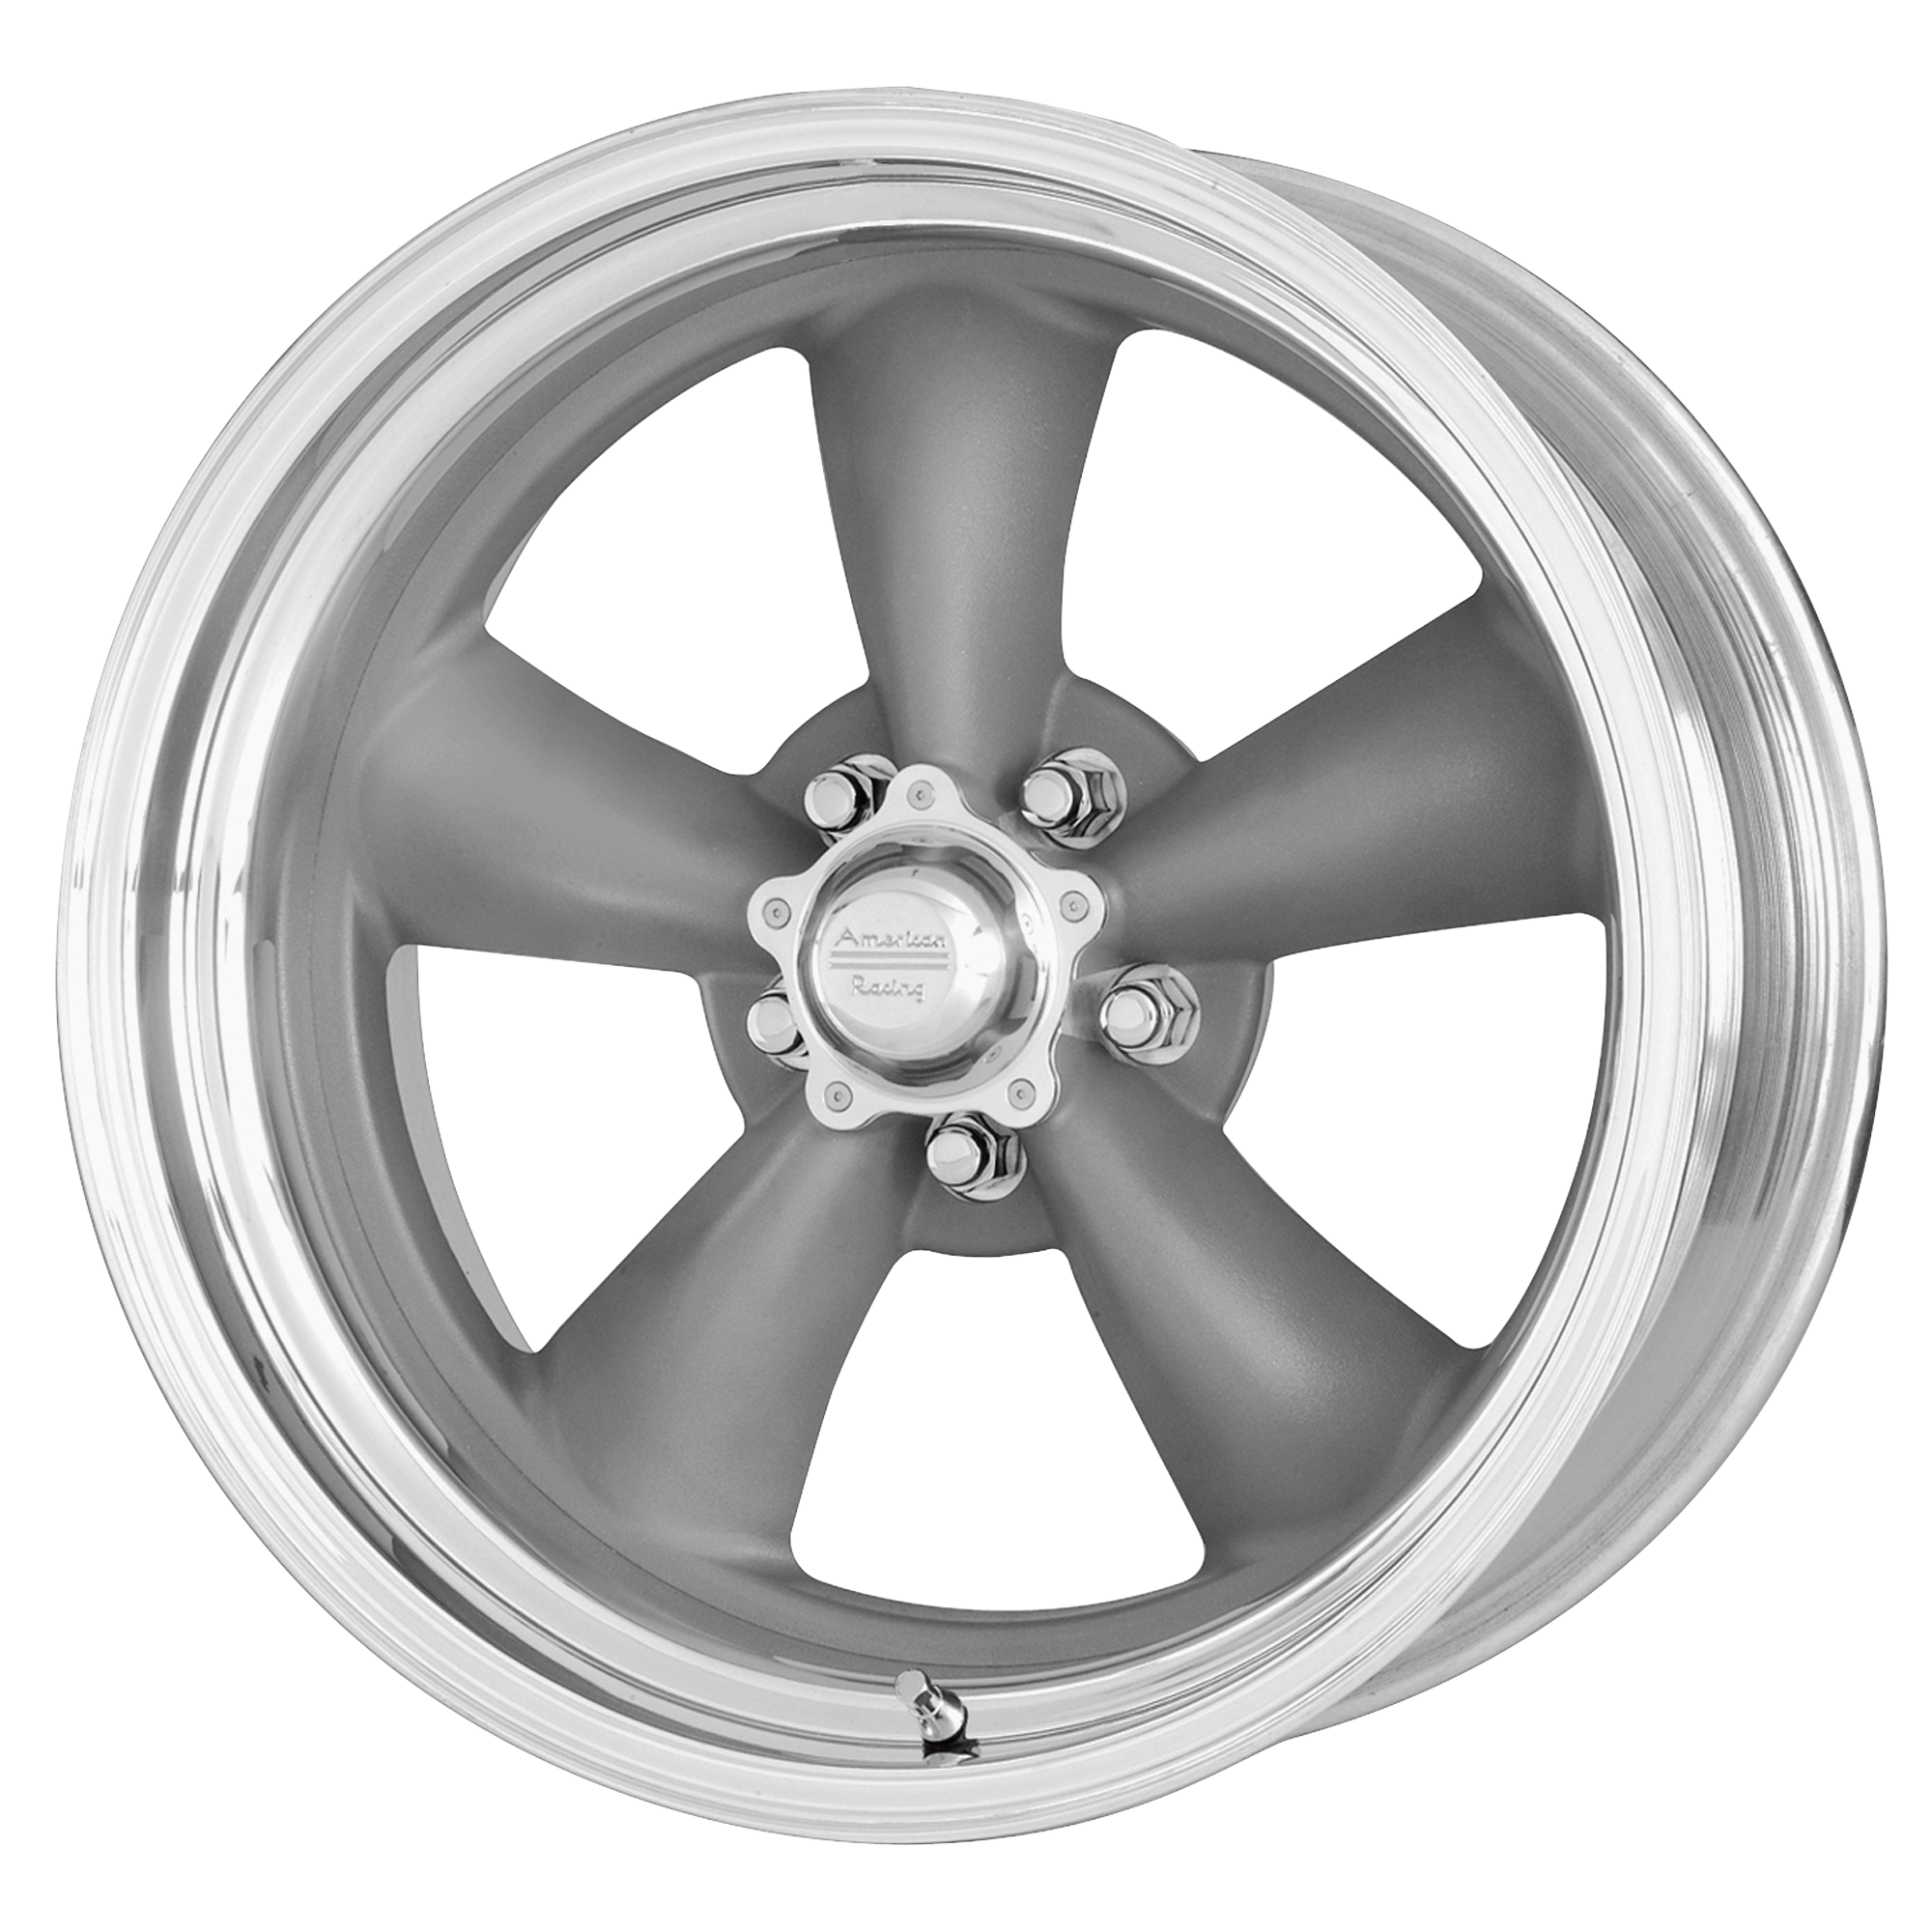 CLASSIC TORQ THRUST II ONE PIECE 15x8 5x127.00 MAG GRAY W/ MACHINED LIP (-18 mm) - Tires and Engine Performance